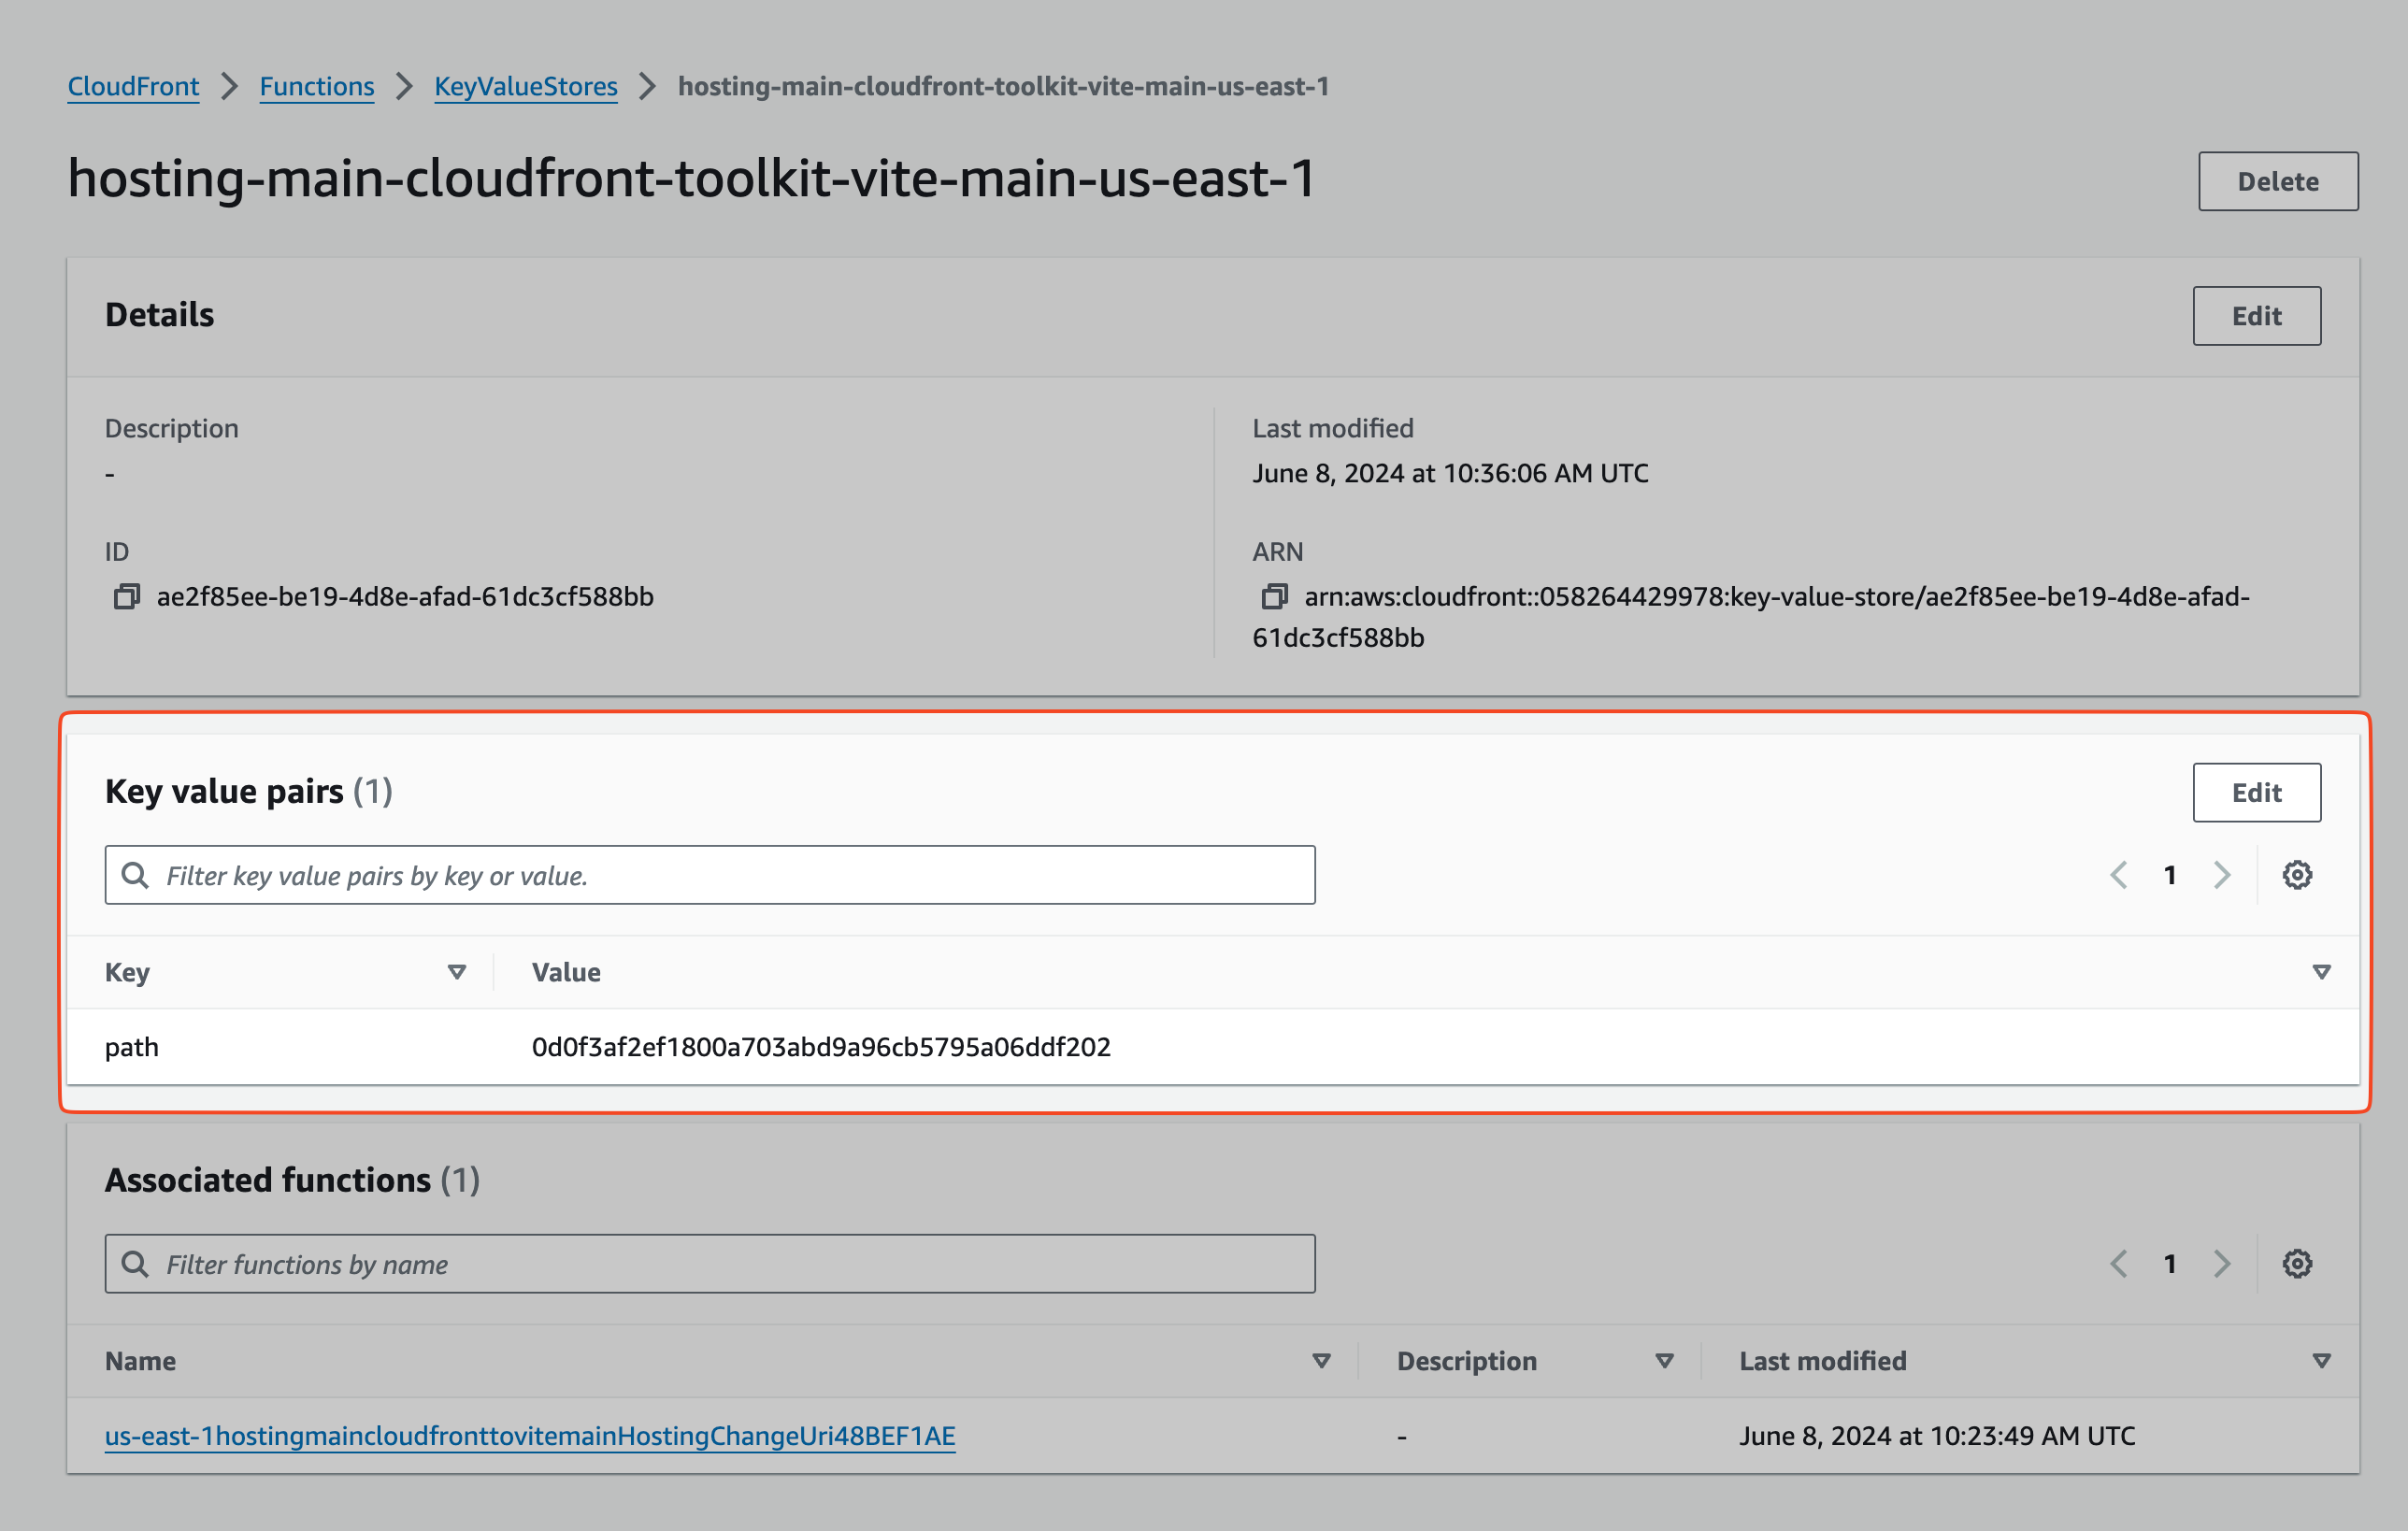 Screenshot of an AWS CloudFront Key-Value Store details page. The page shows the store name "hosting-main-cloudfront-toolkit-vite-main-us-east-1" with its ID, last modified date, and ARN. Below, there is a section for key-value pairs with one entry: Key "path" and Value "0d0f3af2ef1800a703abd9a96cb5795a06ddf202". There is also a section for associated functions, listing one function named "us-east-1hostingmaincloudfrontvitemainHostingChangeUri48BEF1AE".